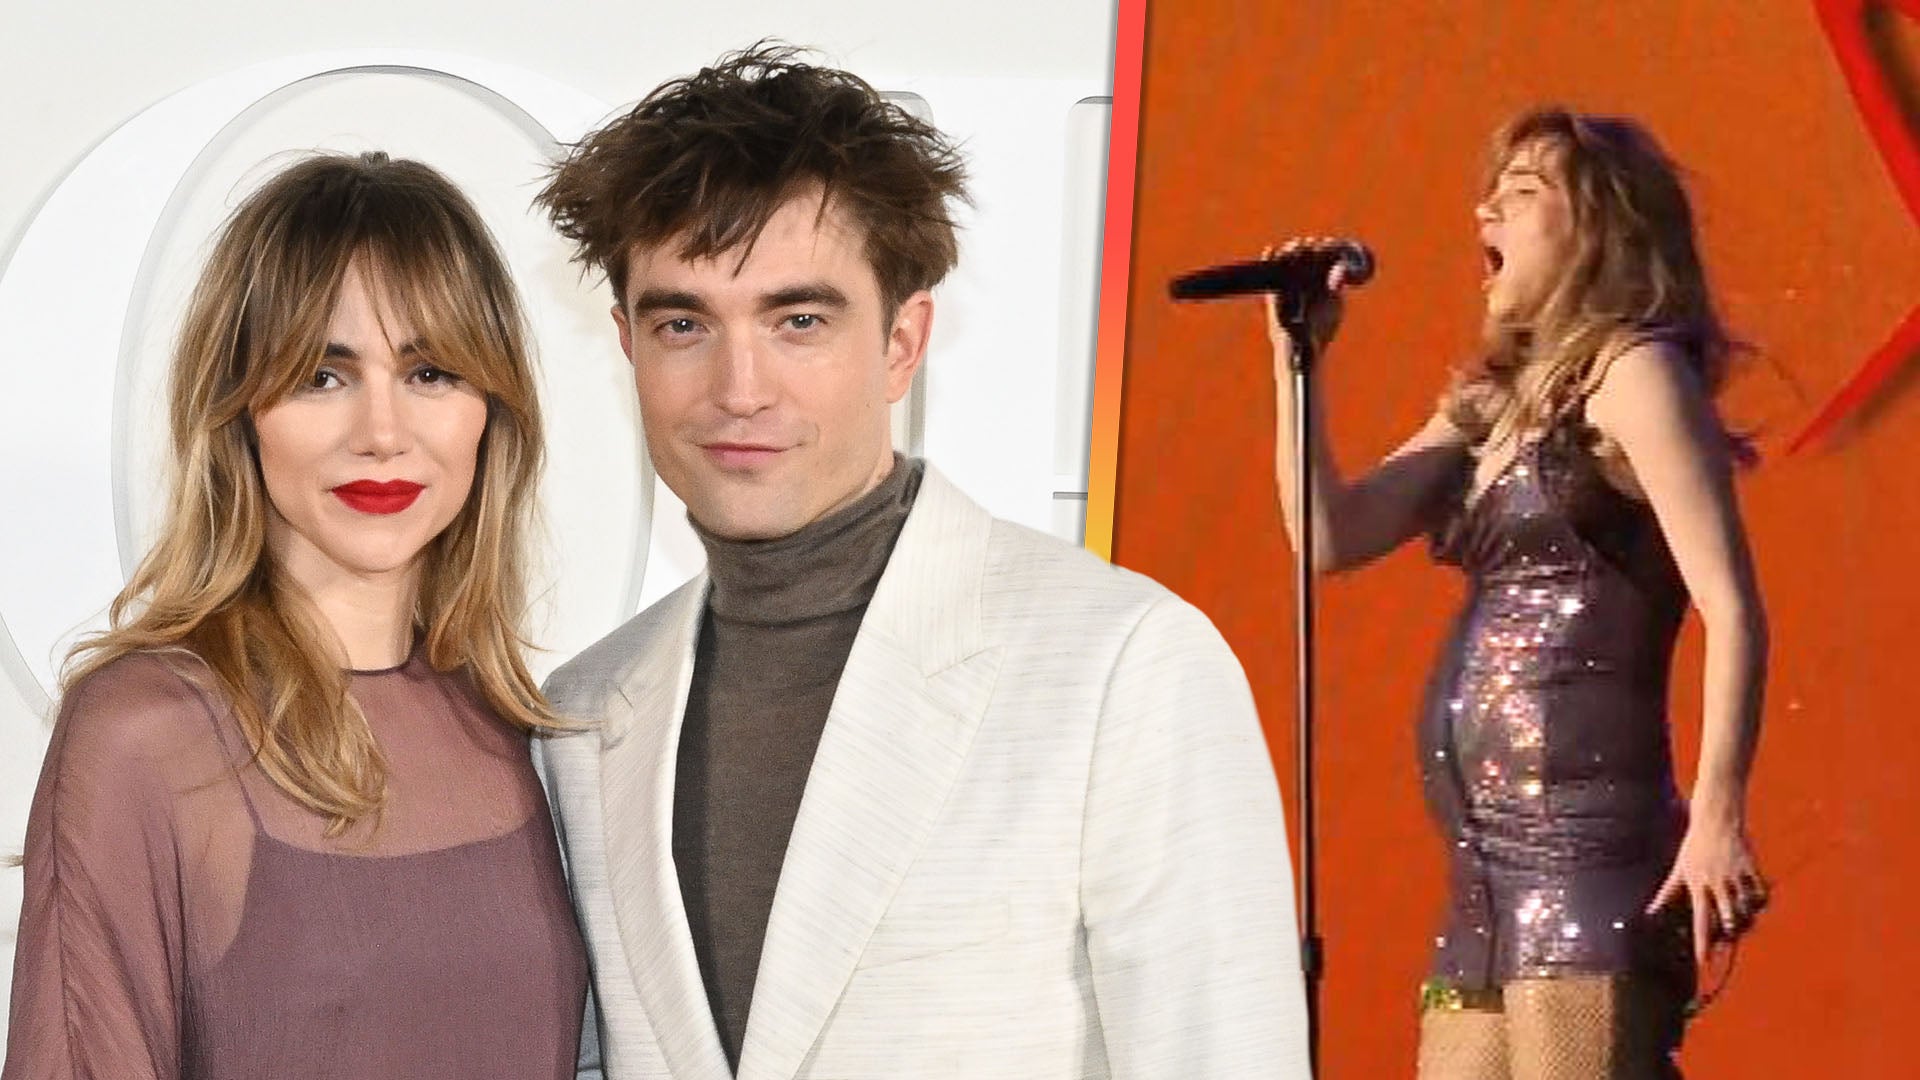 Suki Waterhouse Debuts Baby Bump, Reveals She's Expecting First Child With Robert Pattinson